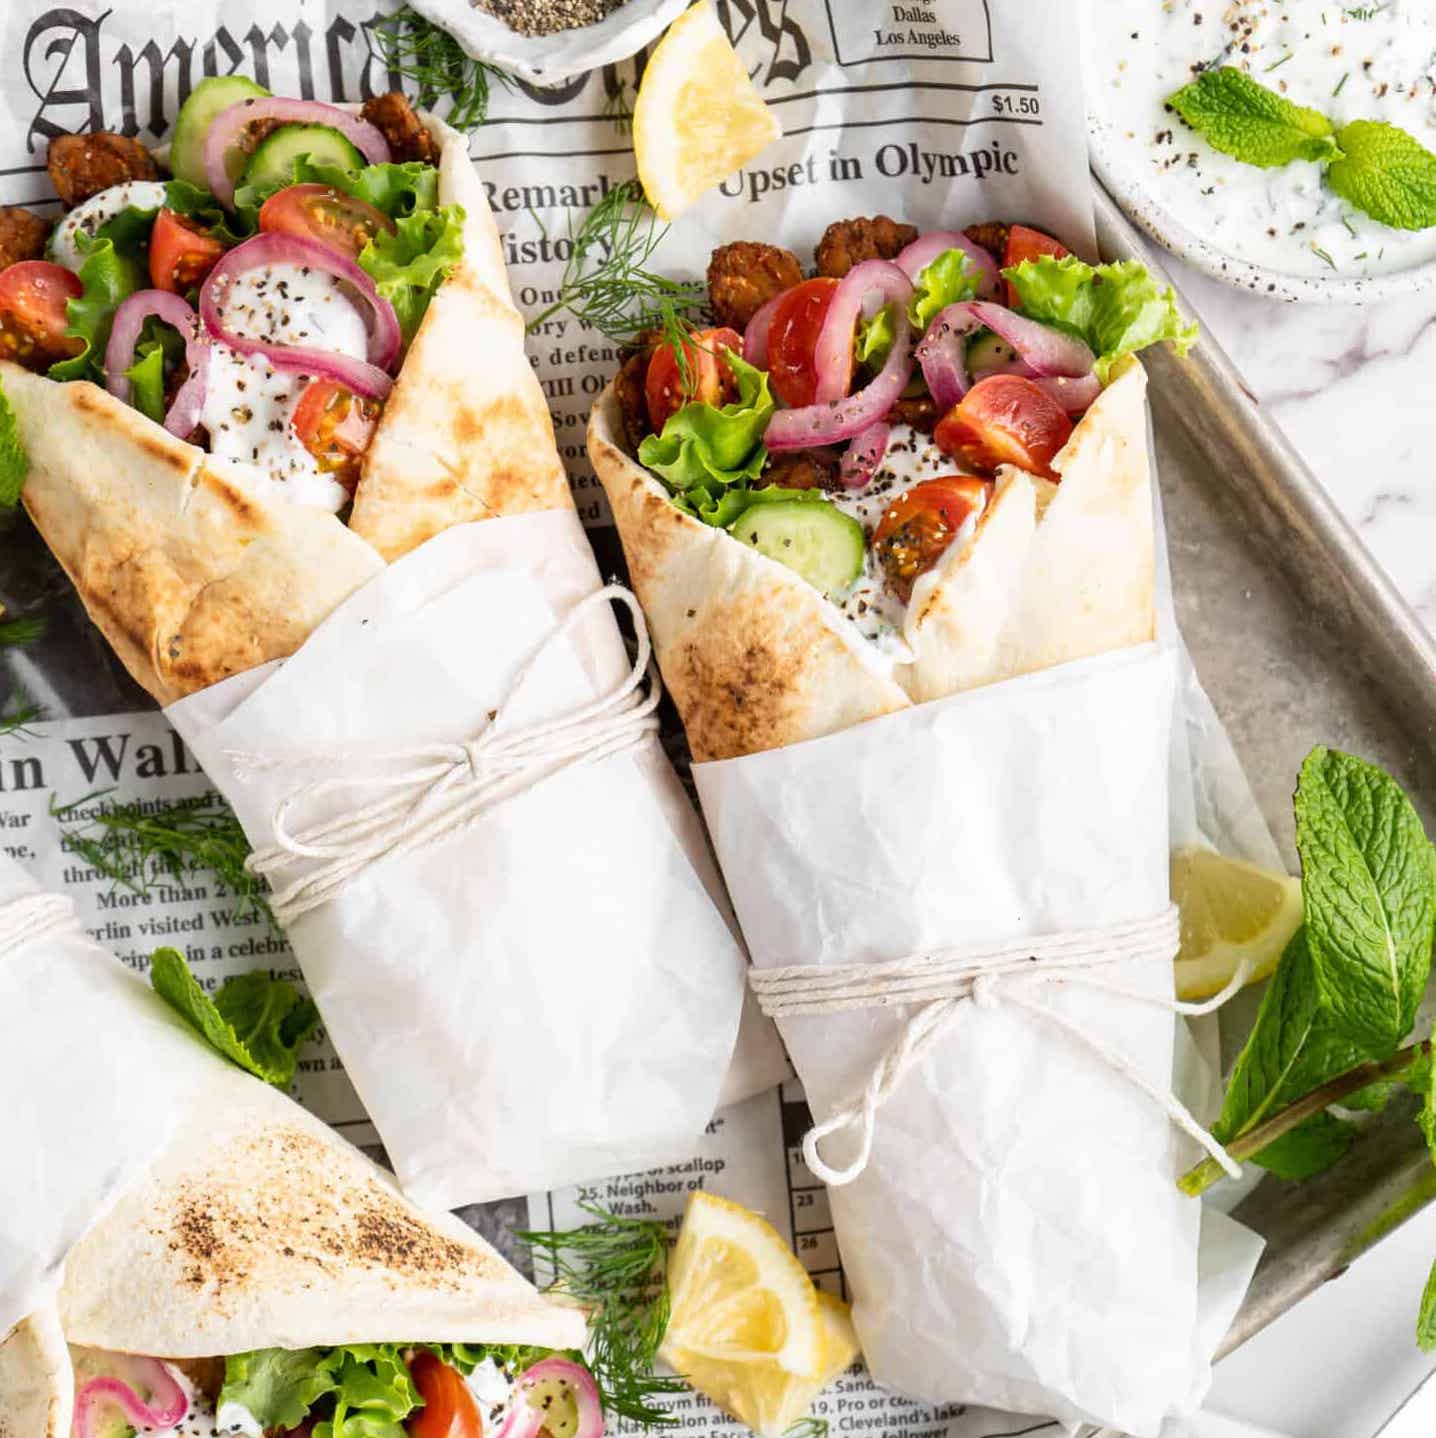 Two wrapped gyros are on a newspaper background. They have pickled red onions, cucumbers, tomatoes, and a white sauce.